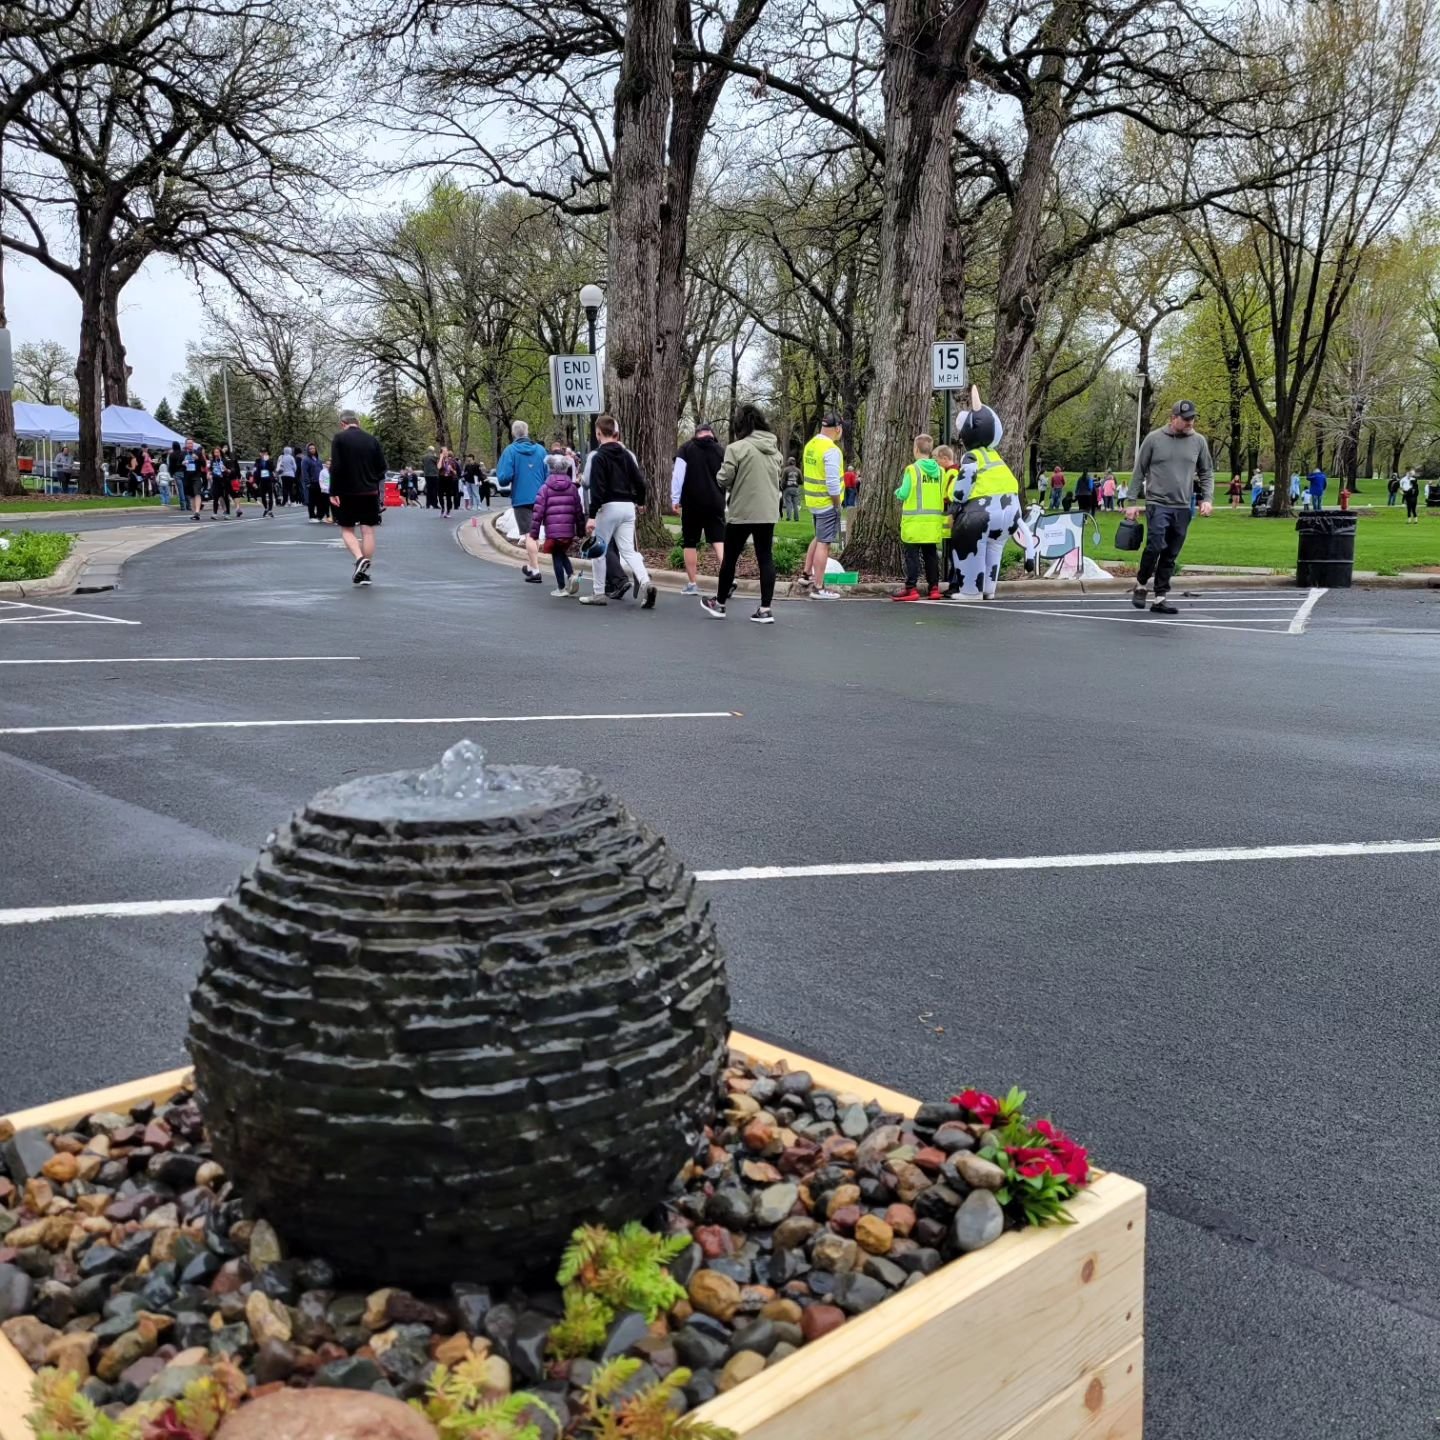 Great time out at the New Prague 5k run!

Was able to spend some time with some runners and their families after the race. Lots of kids getting their hands in the fountain with lots of the biggest smiles! 😁

And great hanging basket sale over at The